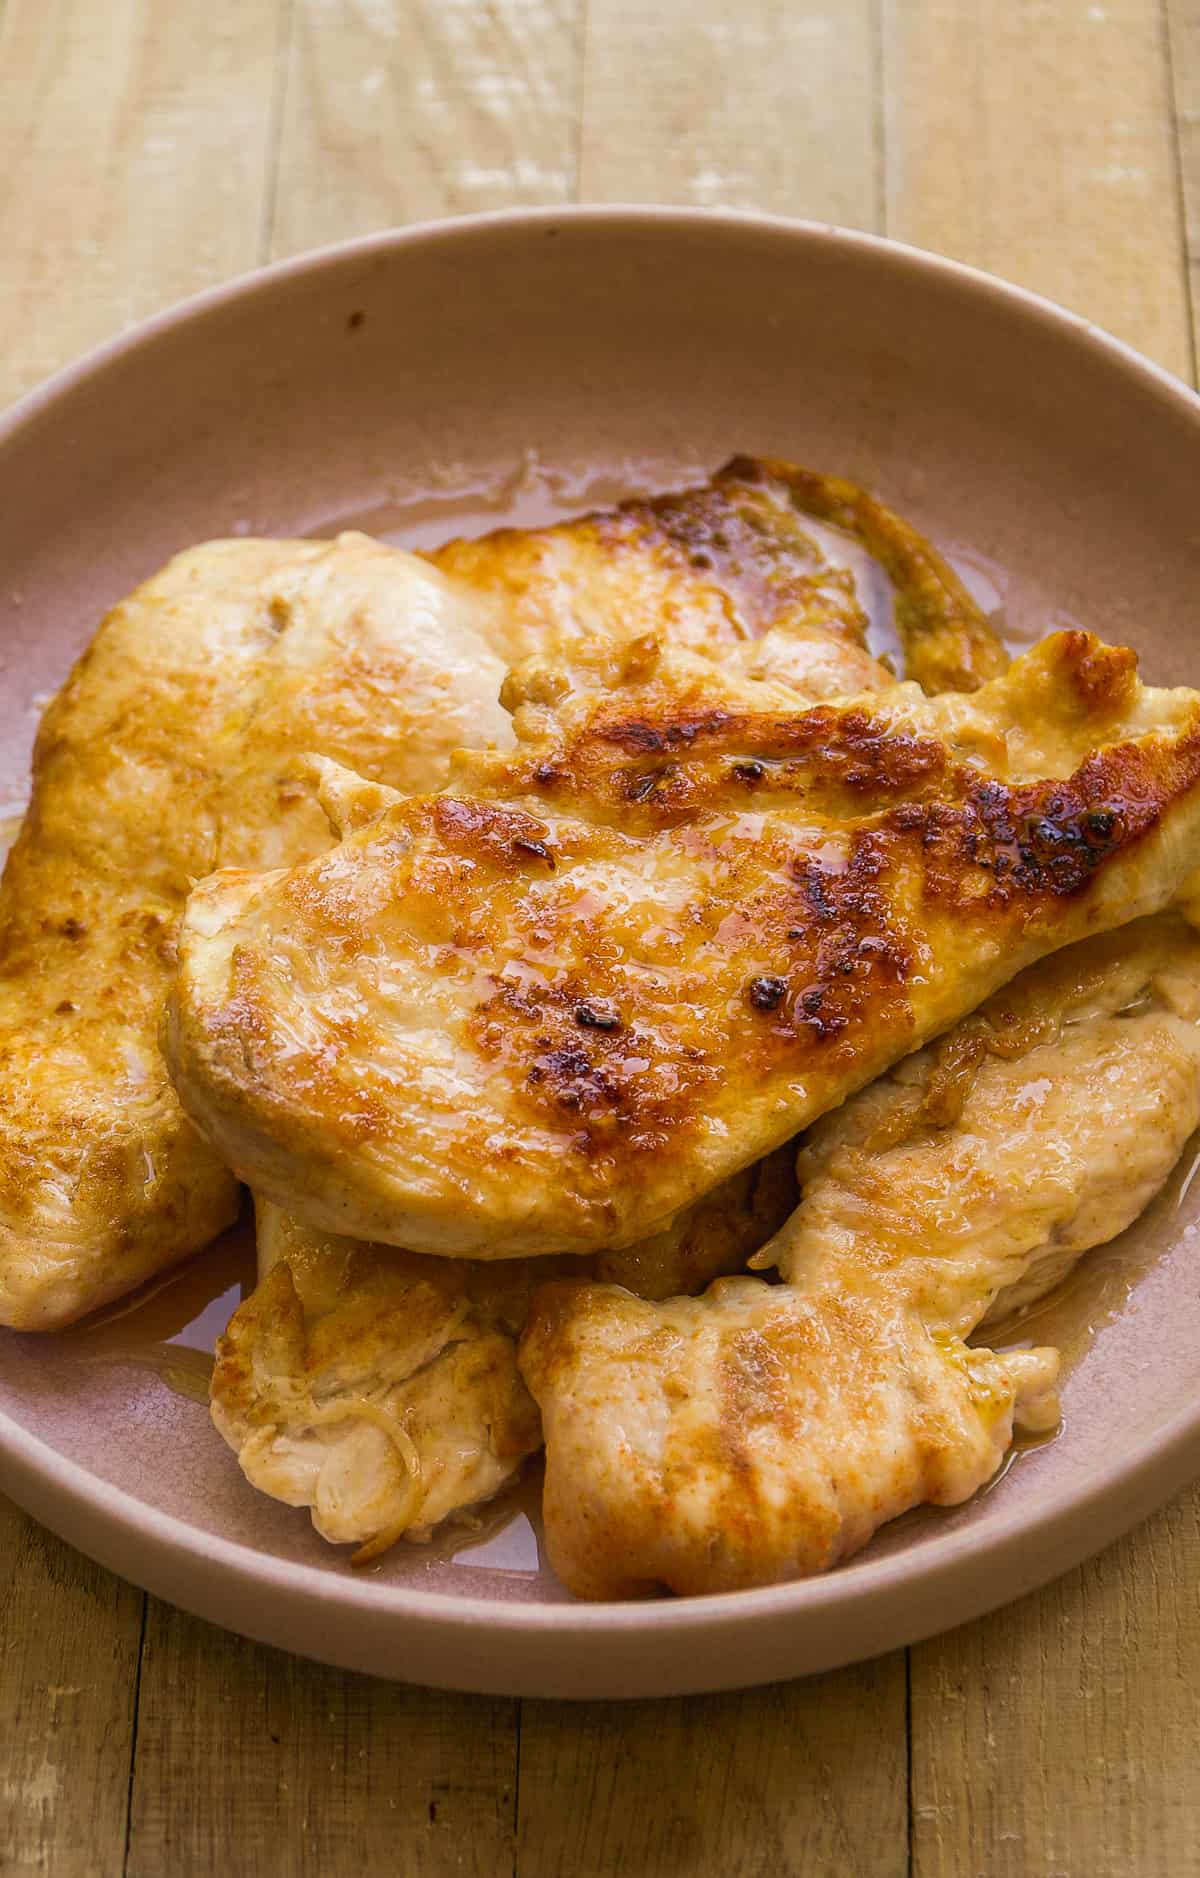 Cooked chicken breast piled up on a plate.